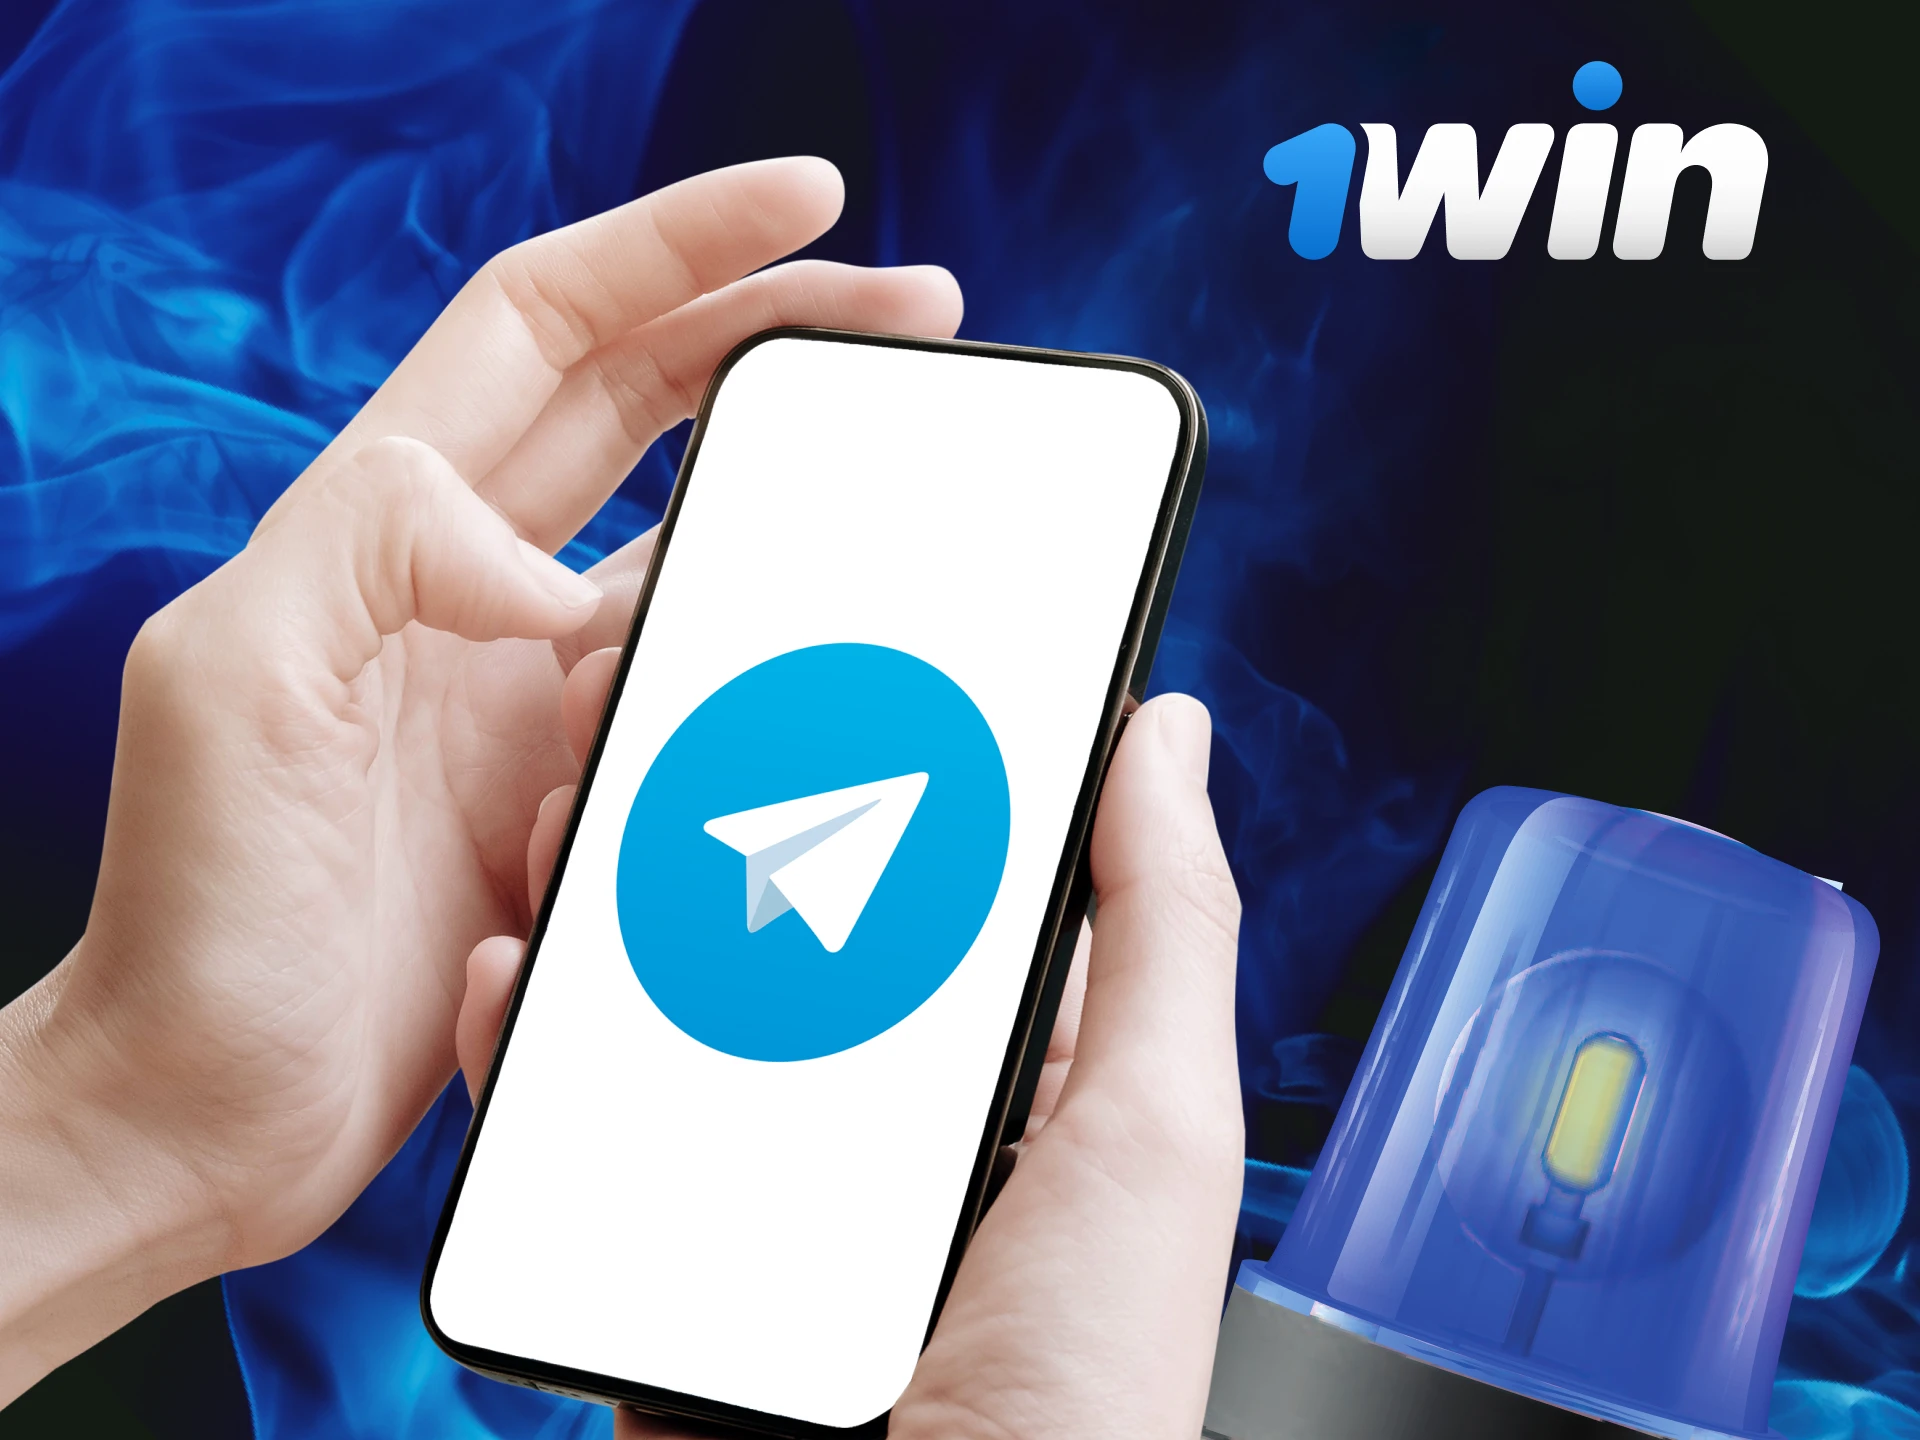 Instructions on how a user can use Aviator Signals in telegram to play Aviator on the 1Win casino website.